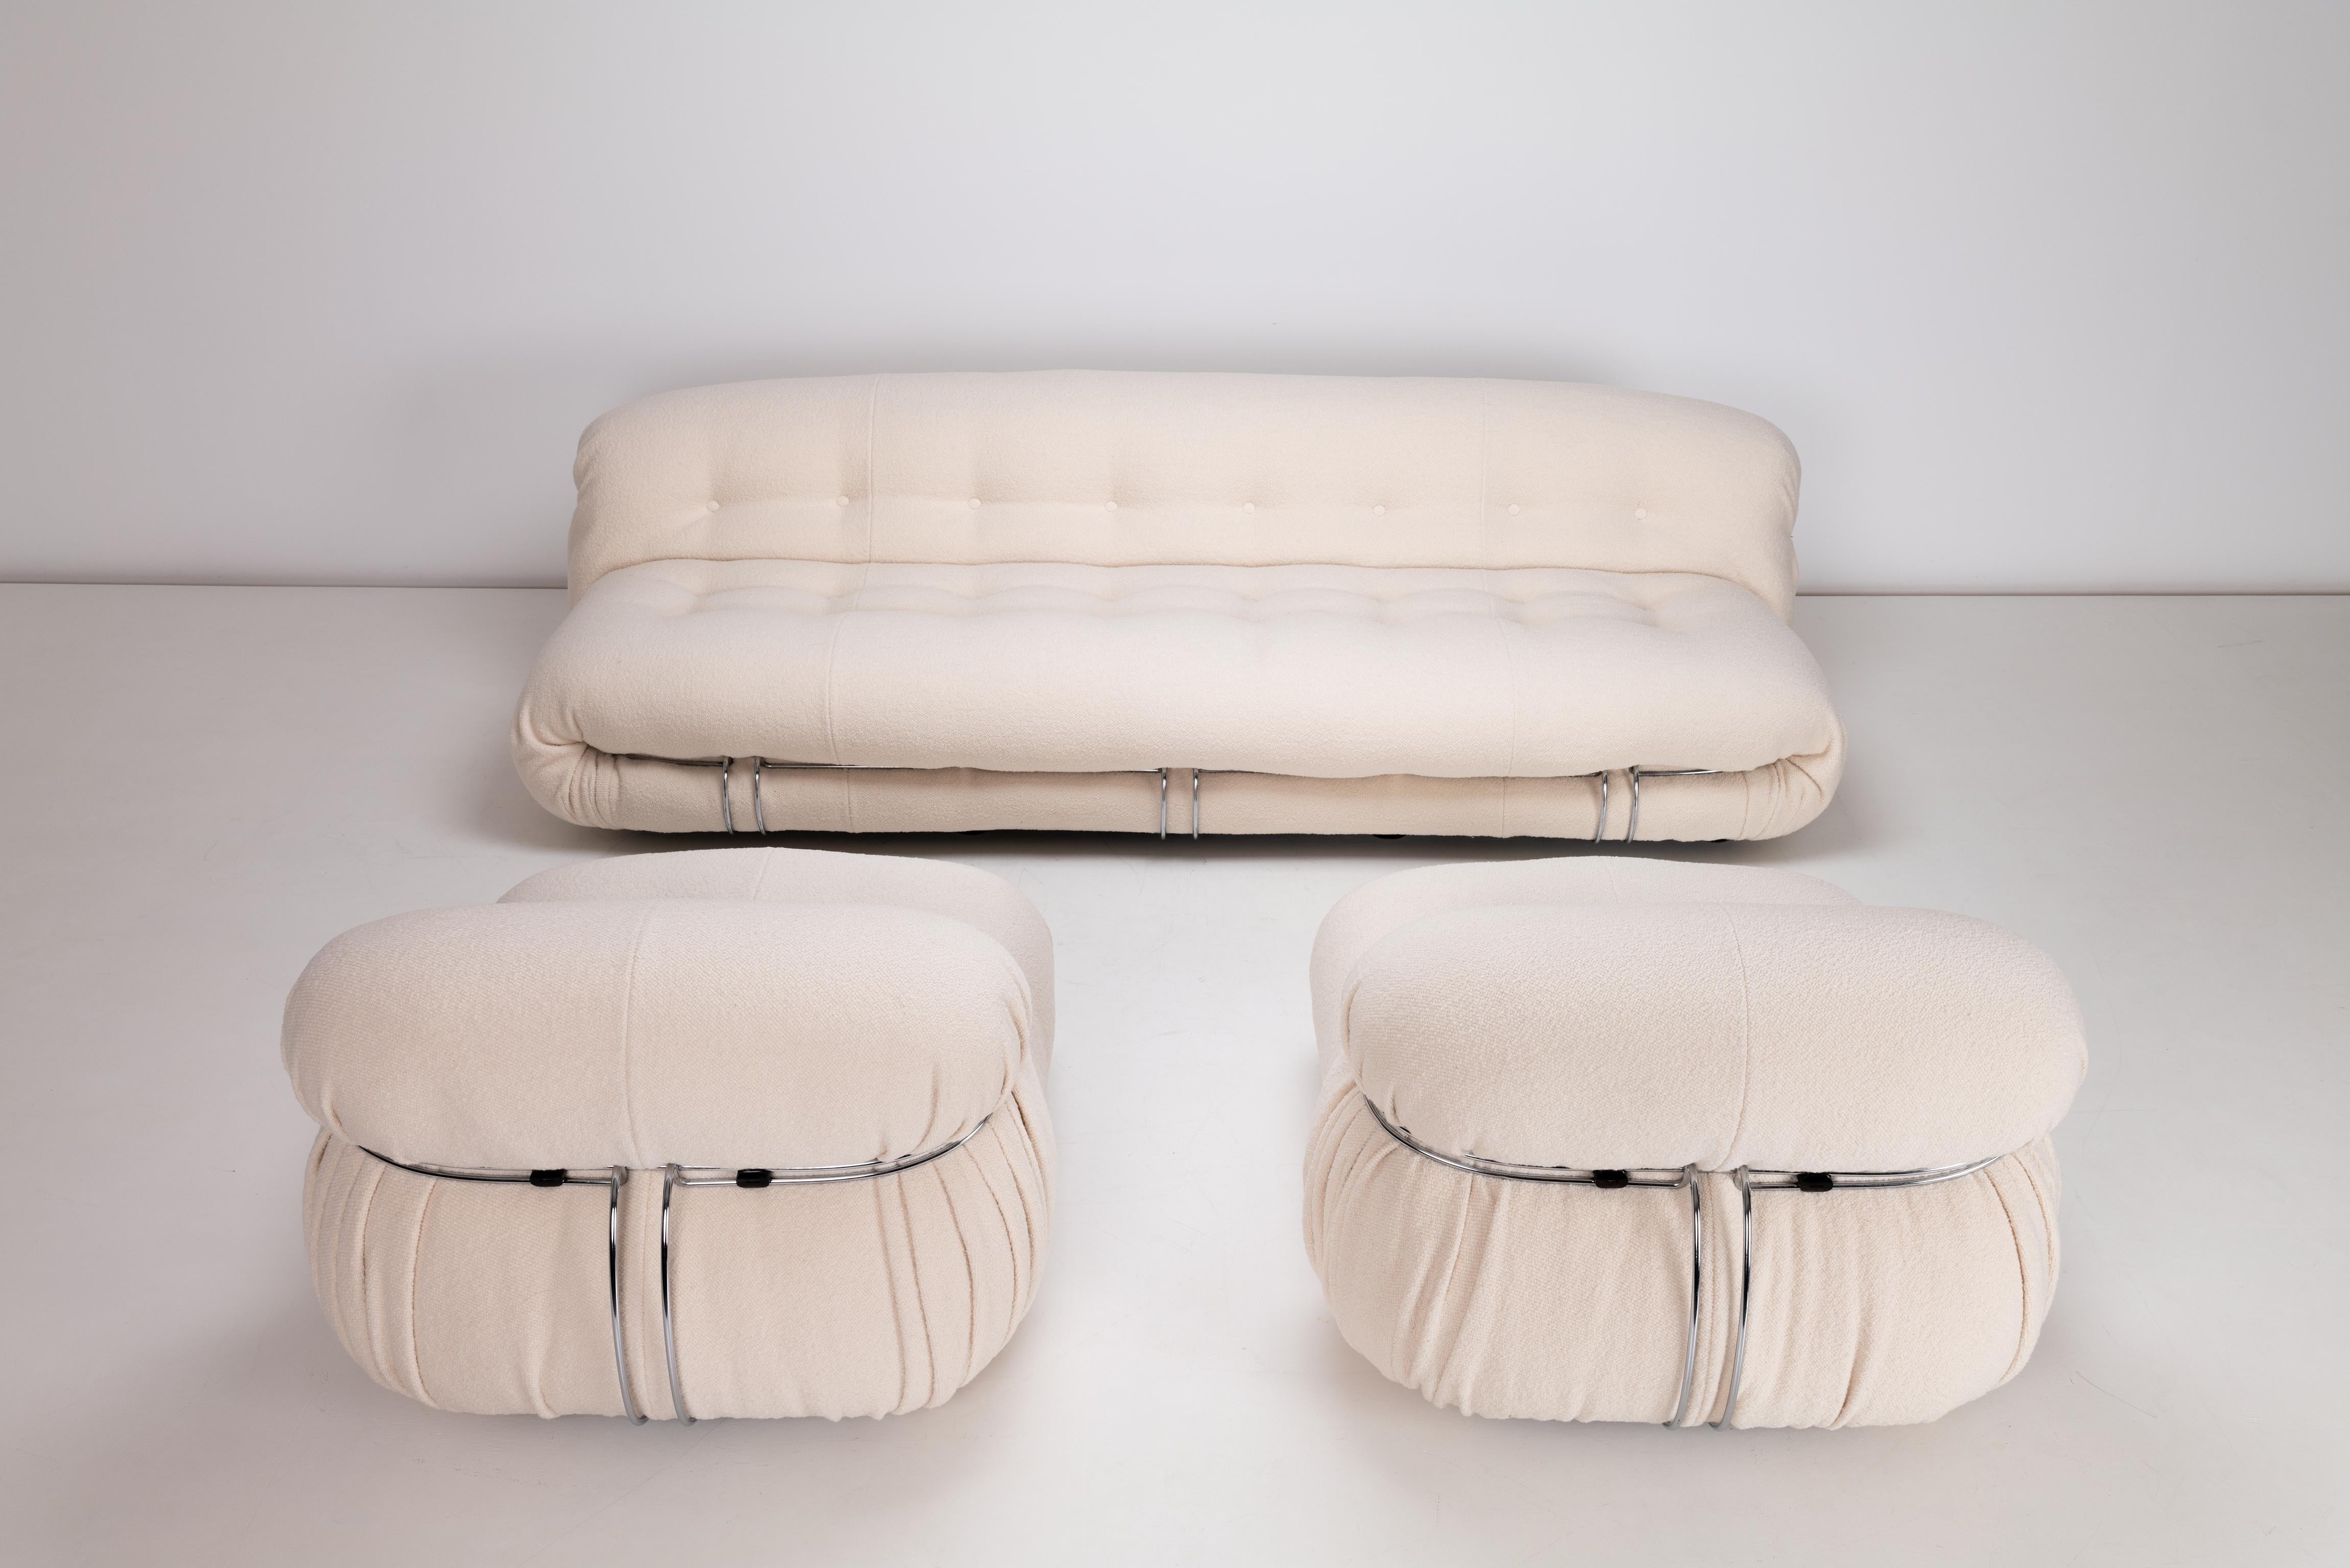 Afra & Tobia Scarpa 'Soriana' Suite for Cassina c1969

A fantastic suite designed by the designer couple Afra & Tobia Scarpa. The suite is multi award winning and considered a design classic.  Most importantly sofa a sofa suite, it is incredibly